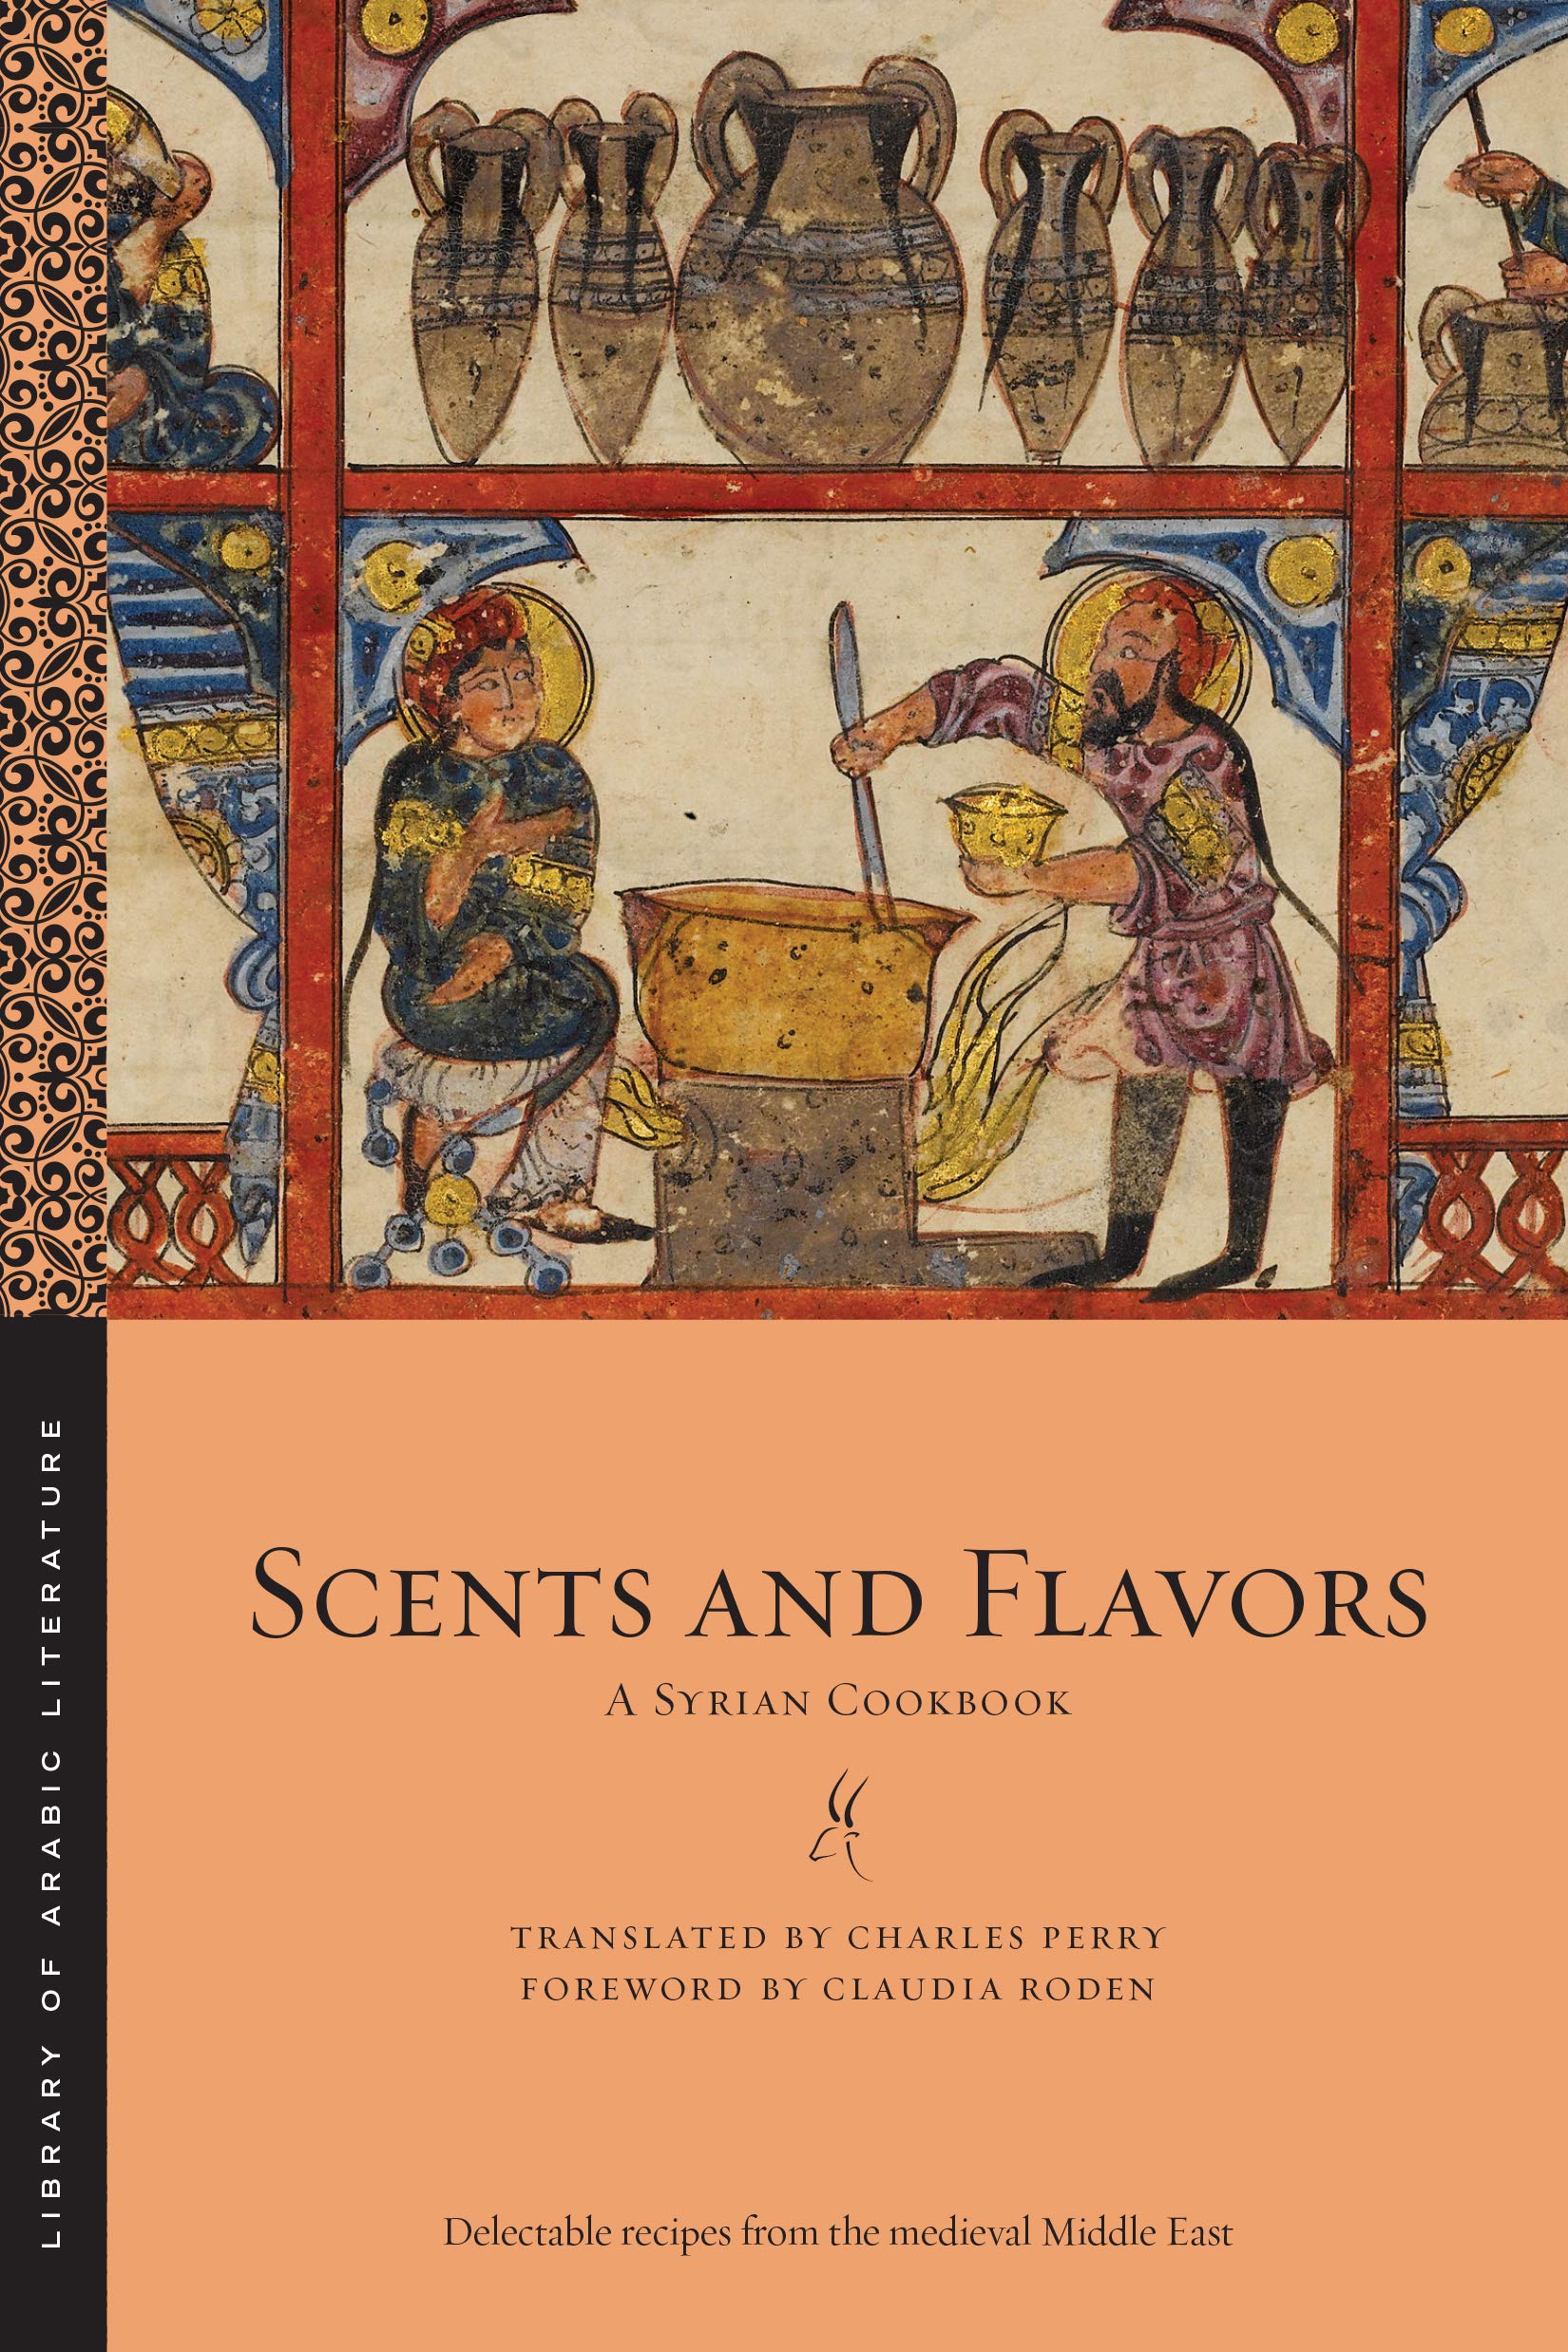 Scents and Flavors: A Syrian Cookbook.